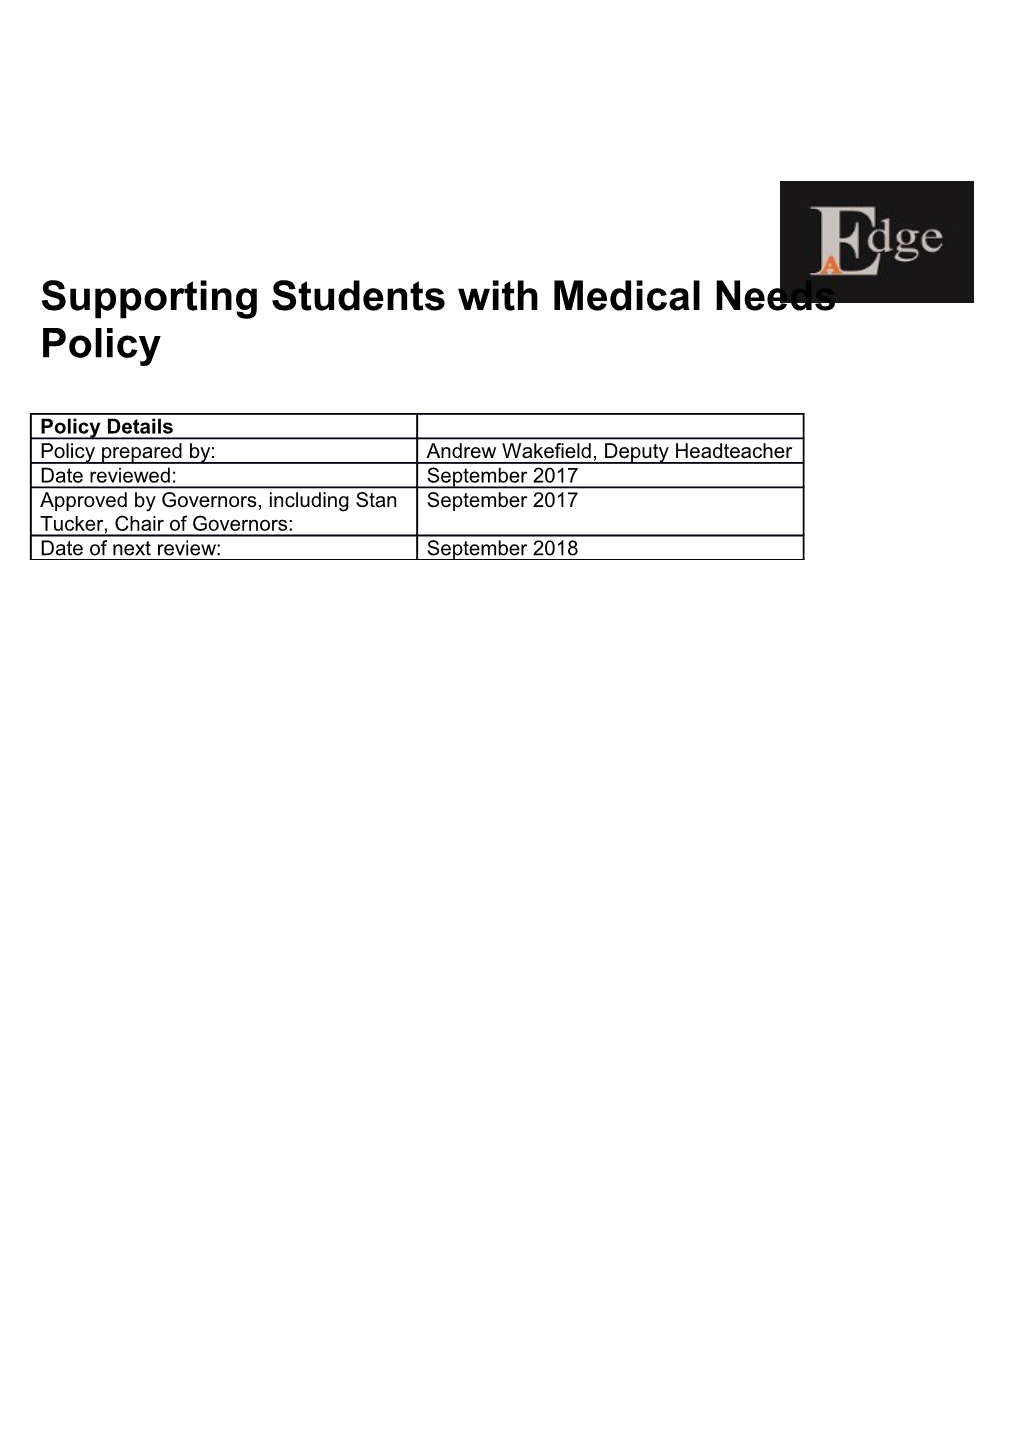 Supporting Students with Medical Needs Policy